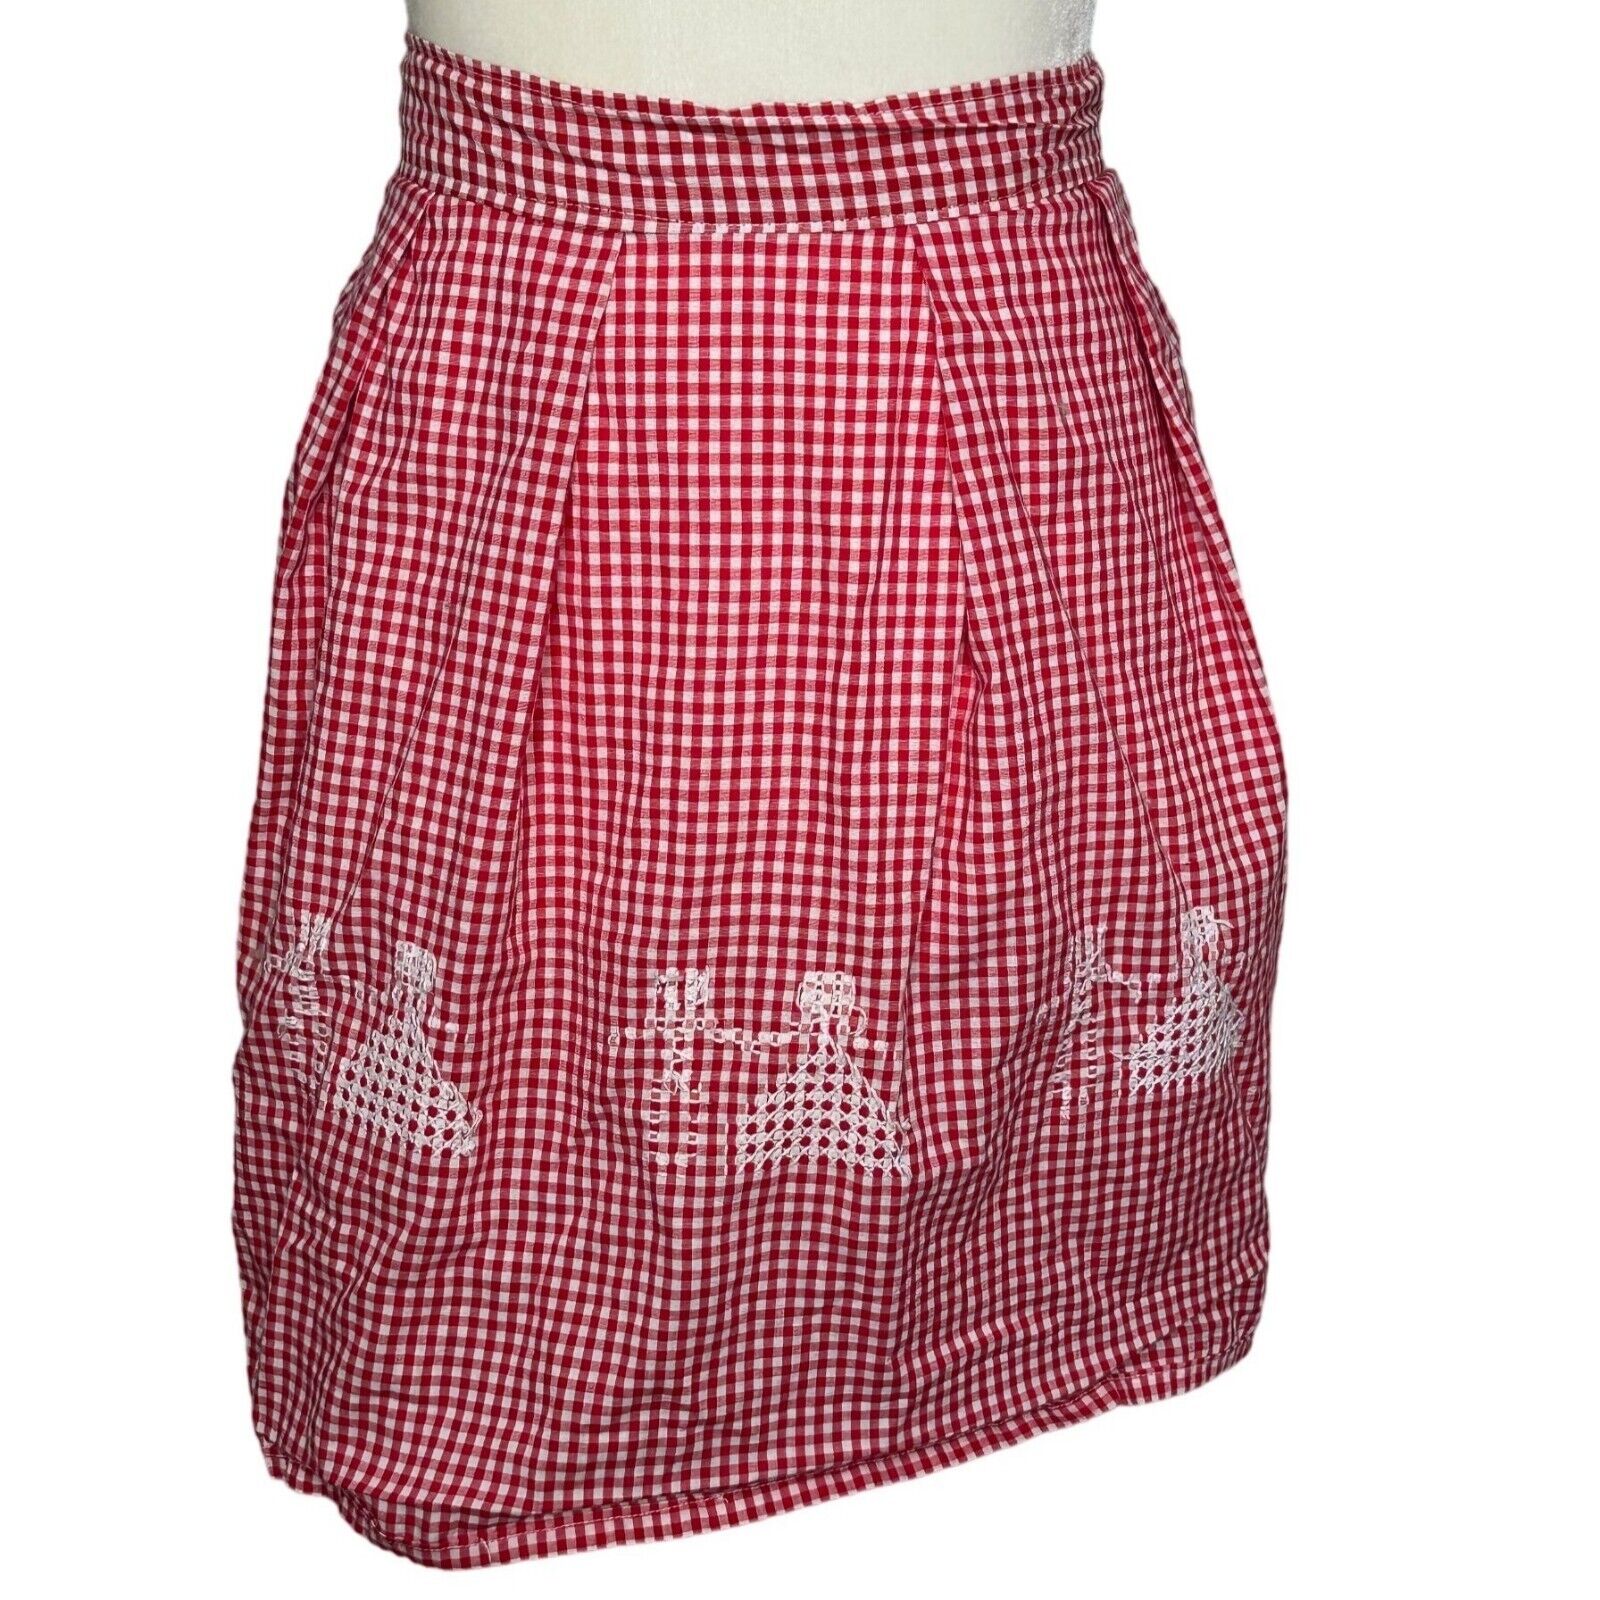 Vintage Red & White Gingham Checkered Half Apron Cross Stitch Embroidery